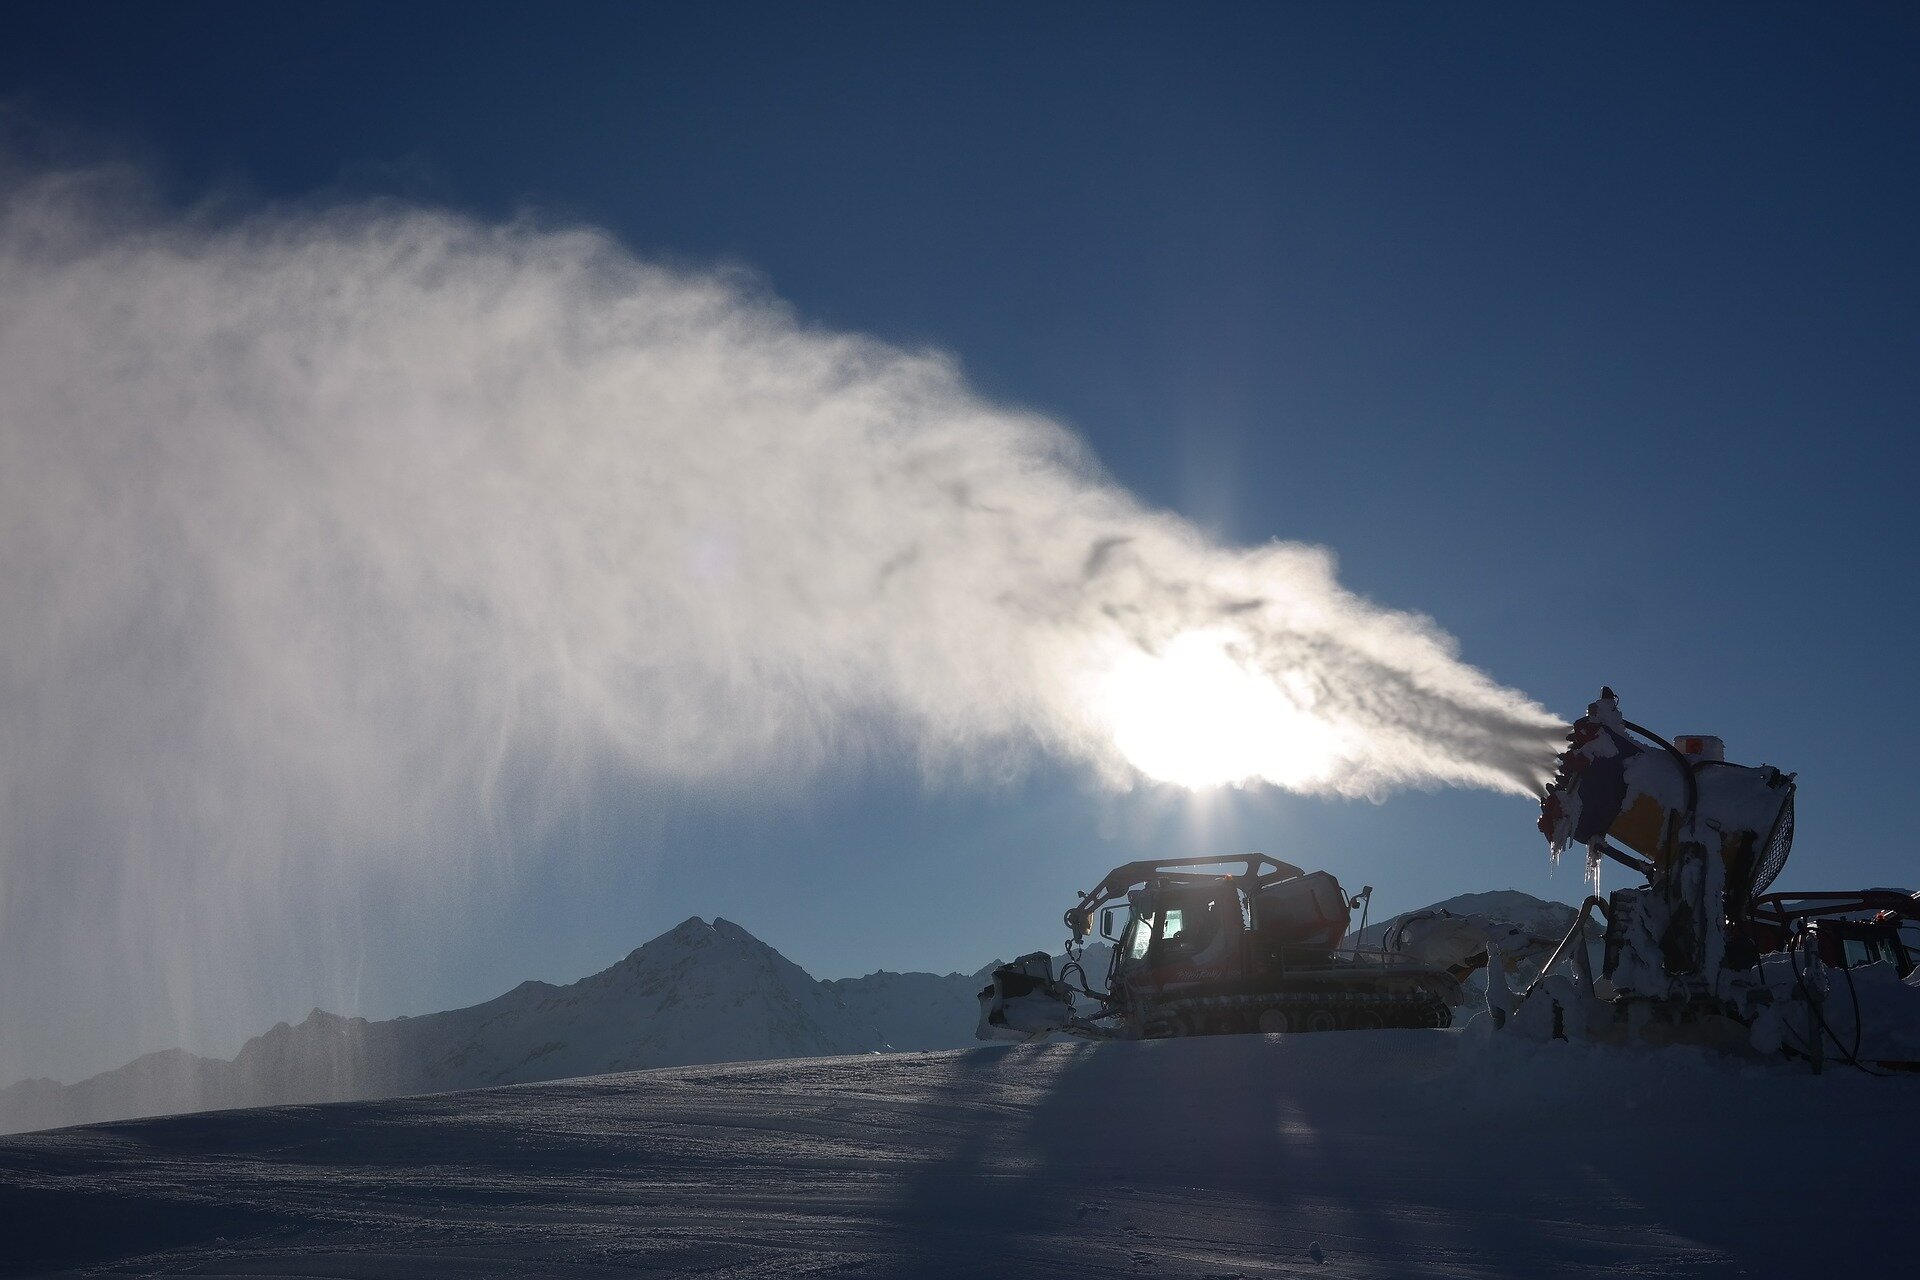 Experts Uncover the Water and Emissions Footprint of Snowmaking: Can We Rely on It in an Era of Climate Change?